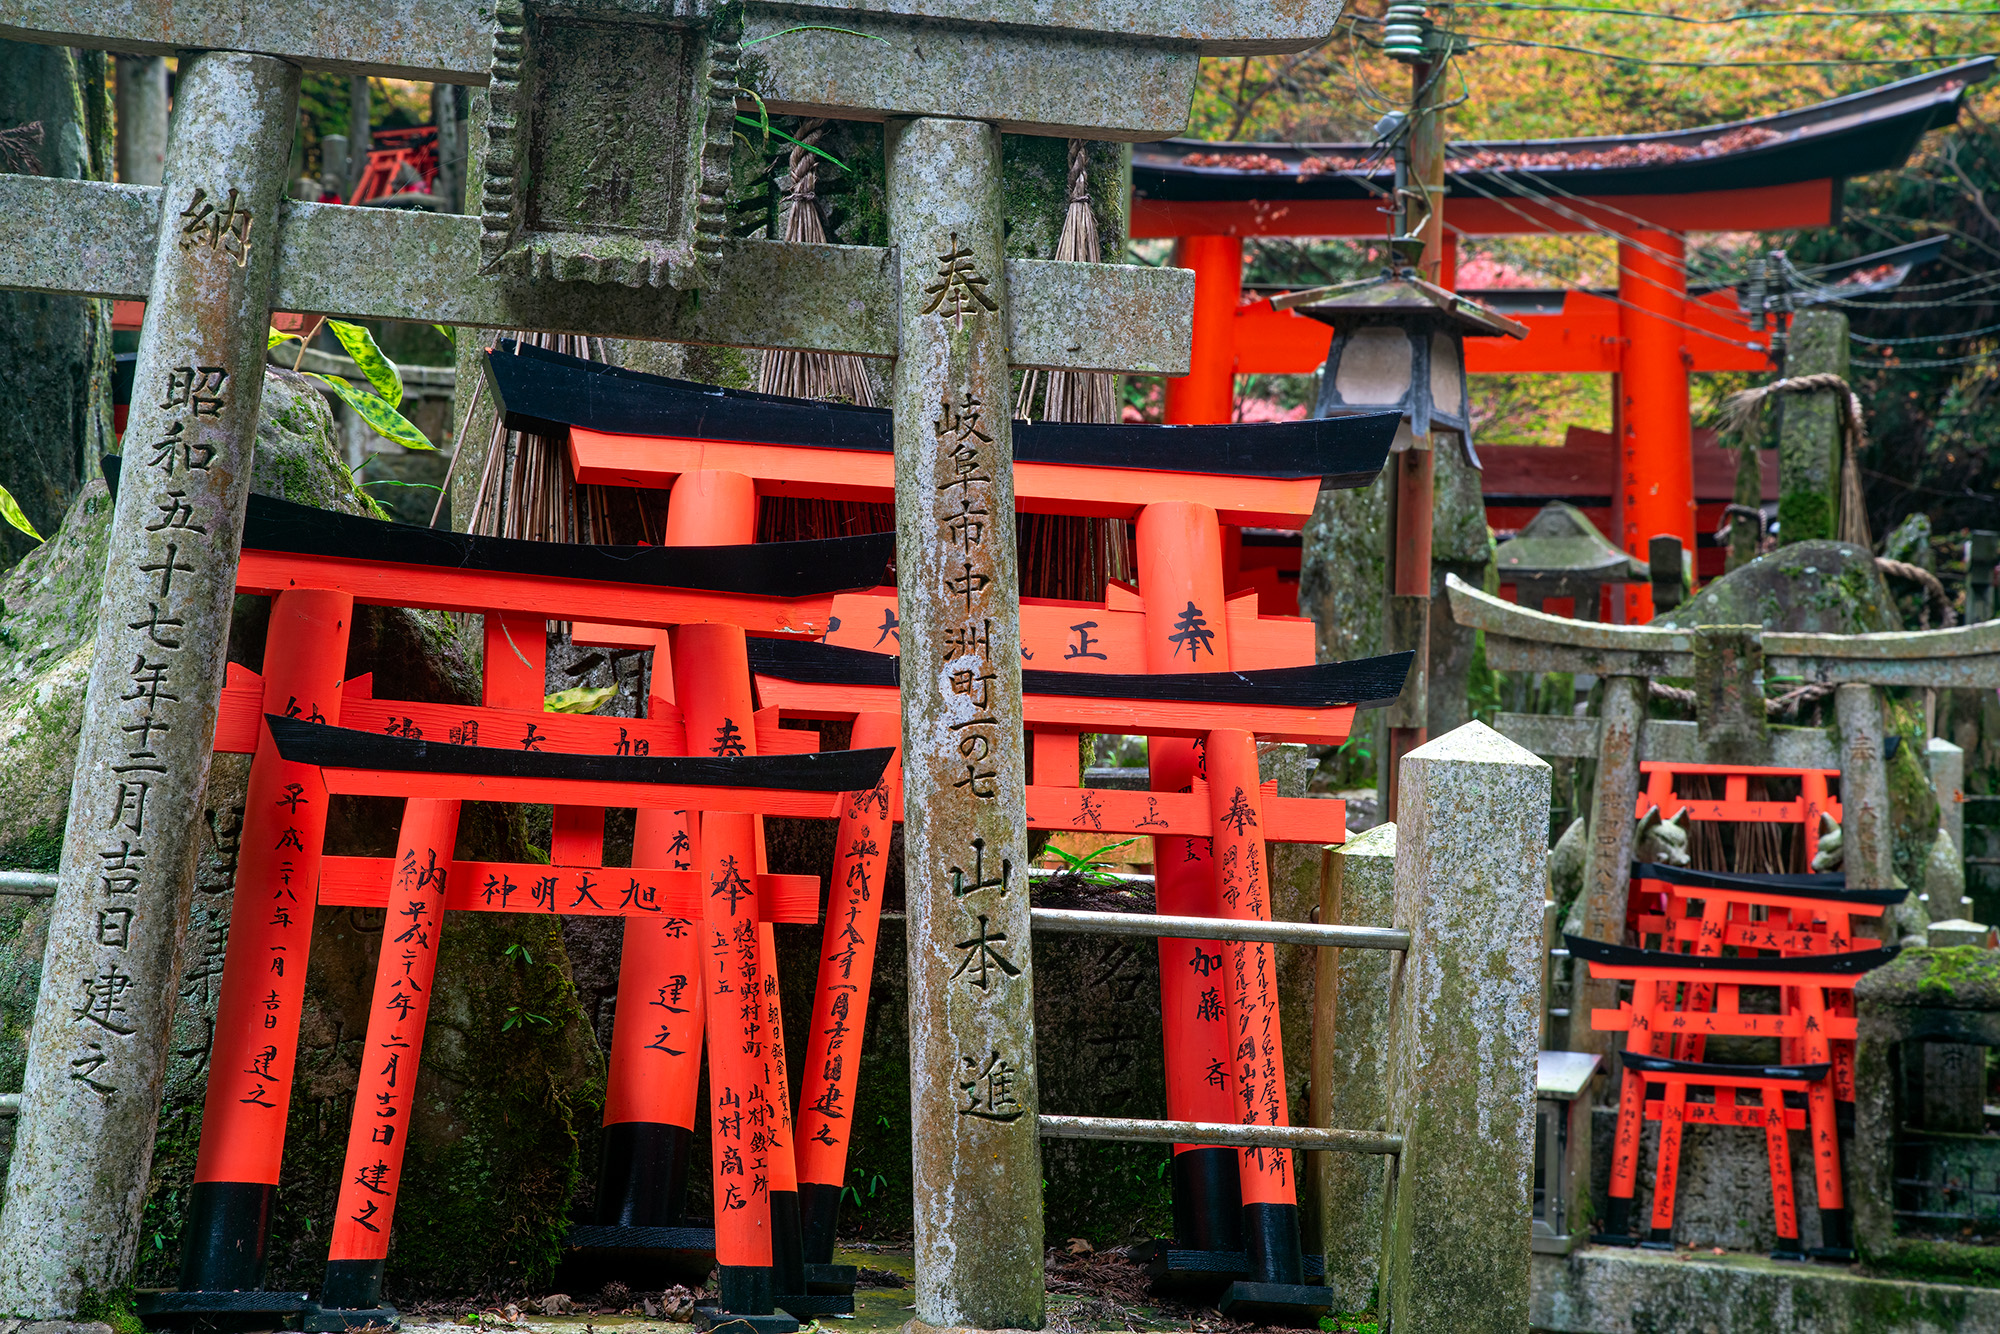 "Sacred Rest" captures the tranquility of a cemetery atop the Fushimi Inari trail in Japan. An array of small torii gates, some...